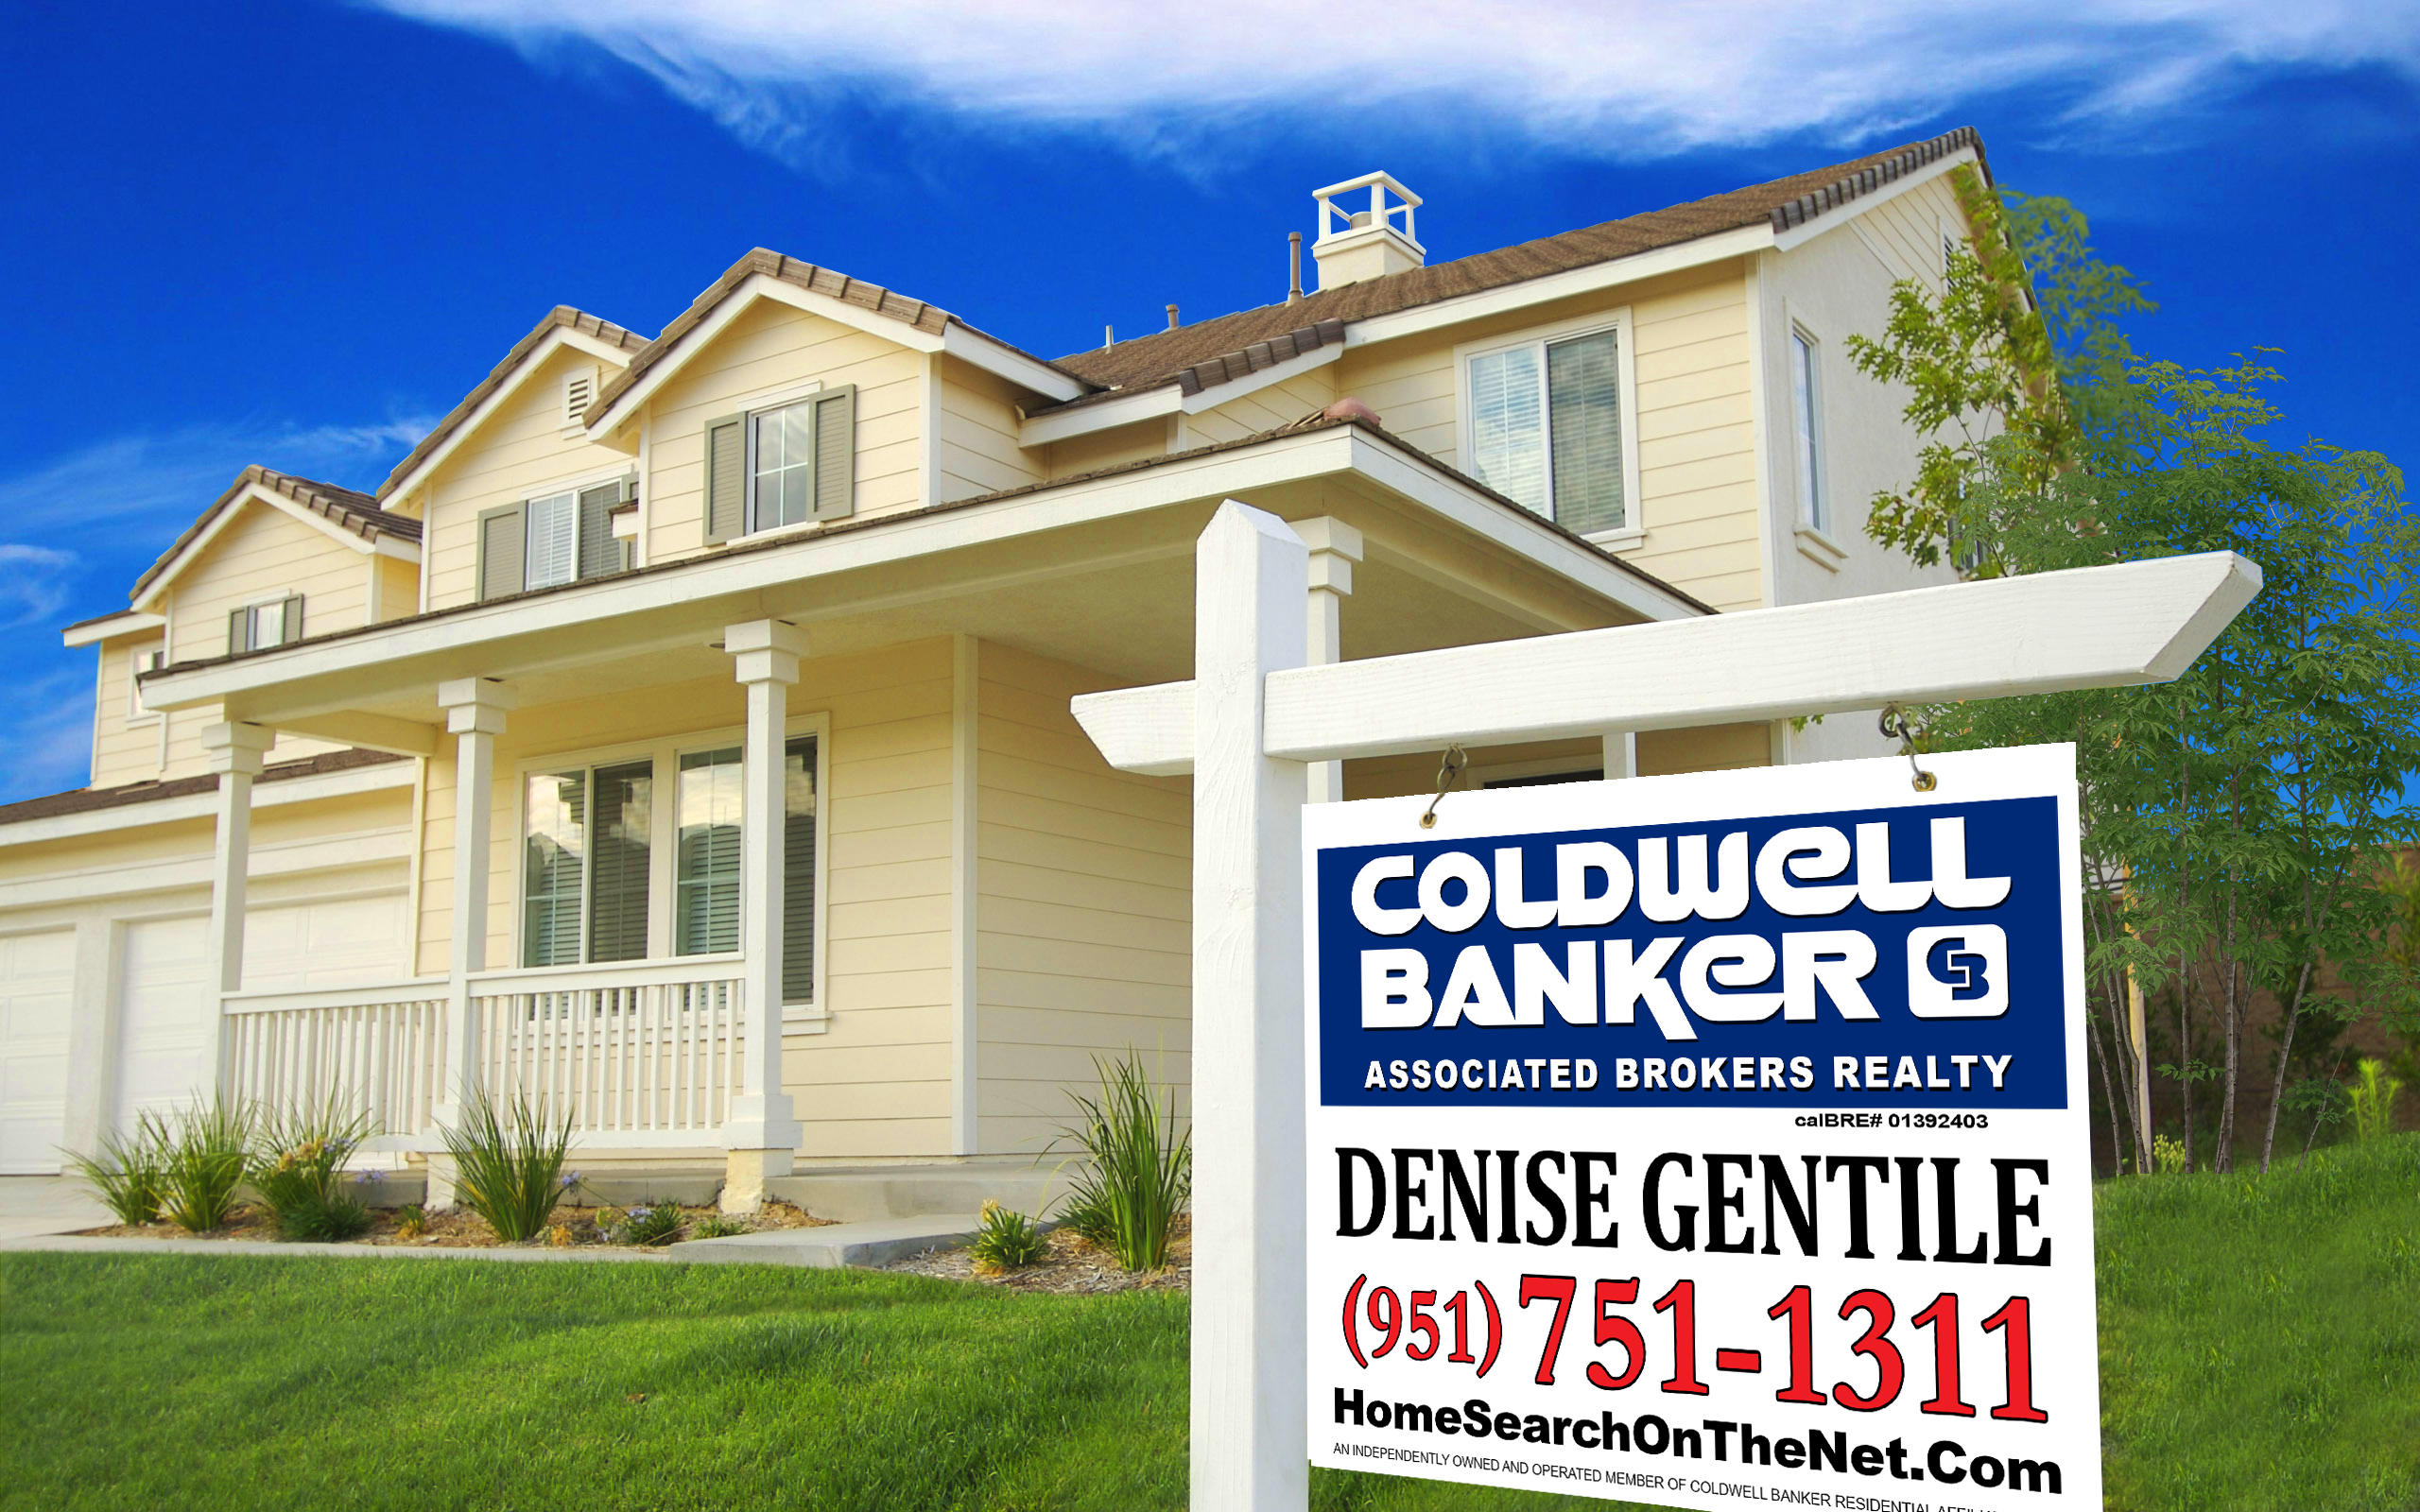 Thinking of Selling your Home?  If you would like friendly service, great communication & professional results! Call Denise Gentile, Realtor at Coldwell Banker Associated Brokers Realty  951-751-1311.